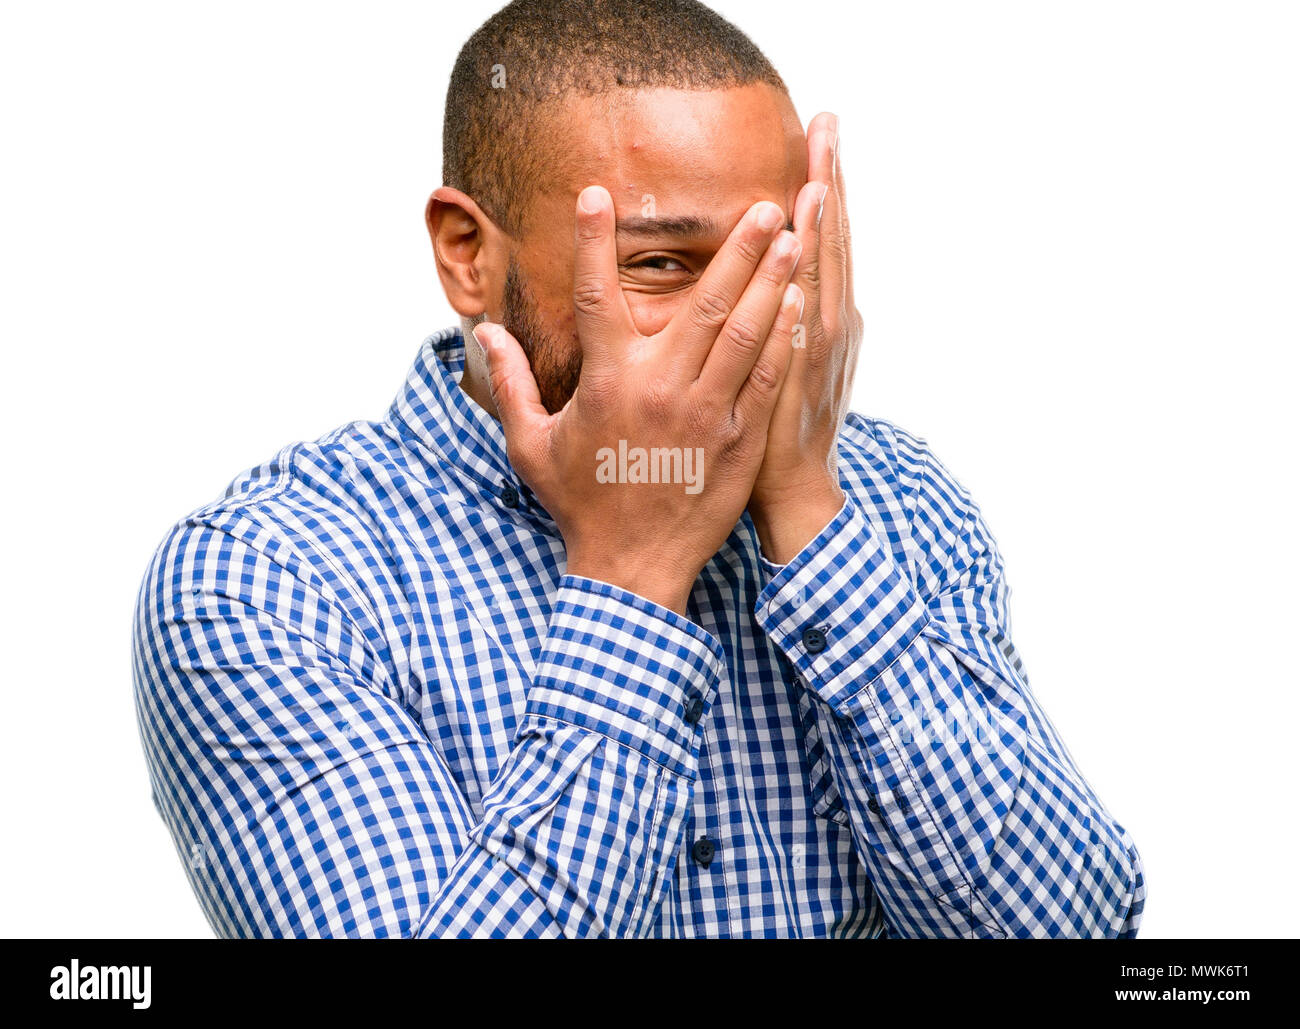 African american man with beard smiling having shy look peeking through fingers, covering face with hands looking confusedly broadly isolated over whi Stock Photo